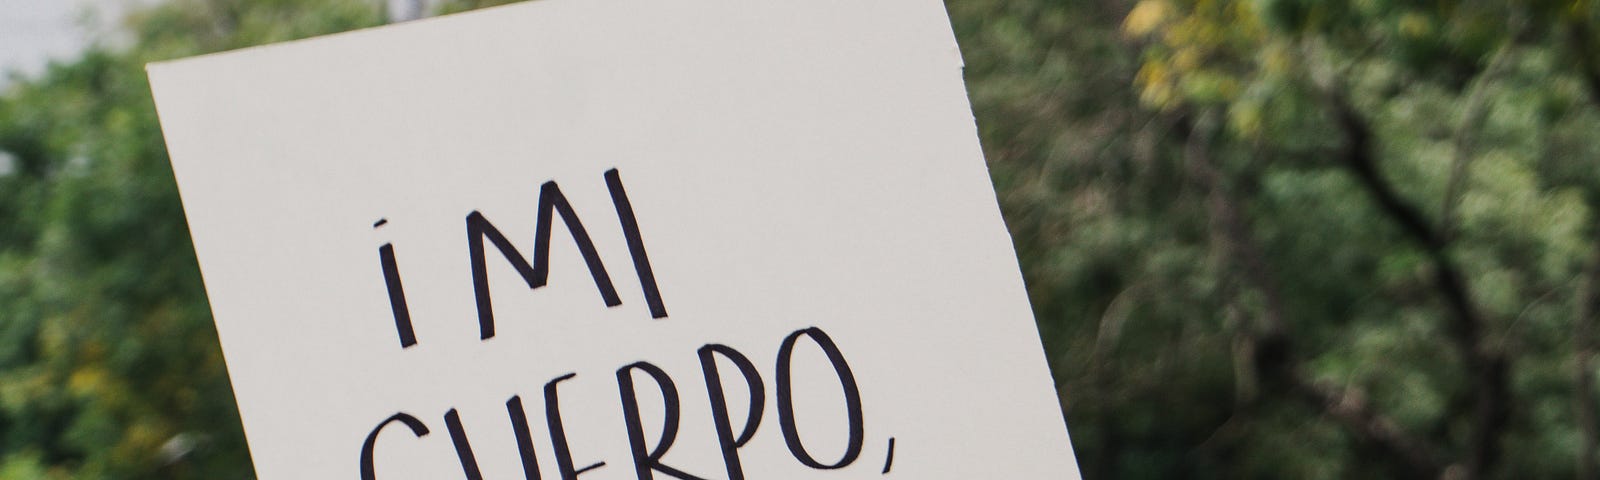 Photo of a person holding a sing that reads “My body, my choice” in Spanish.